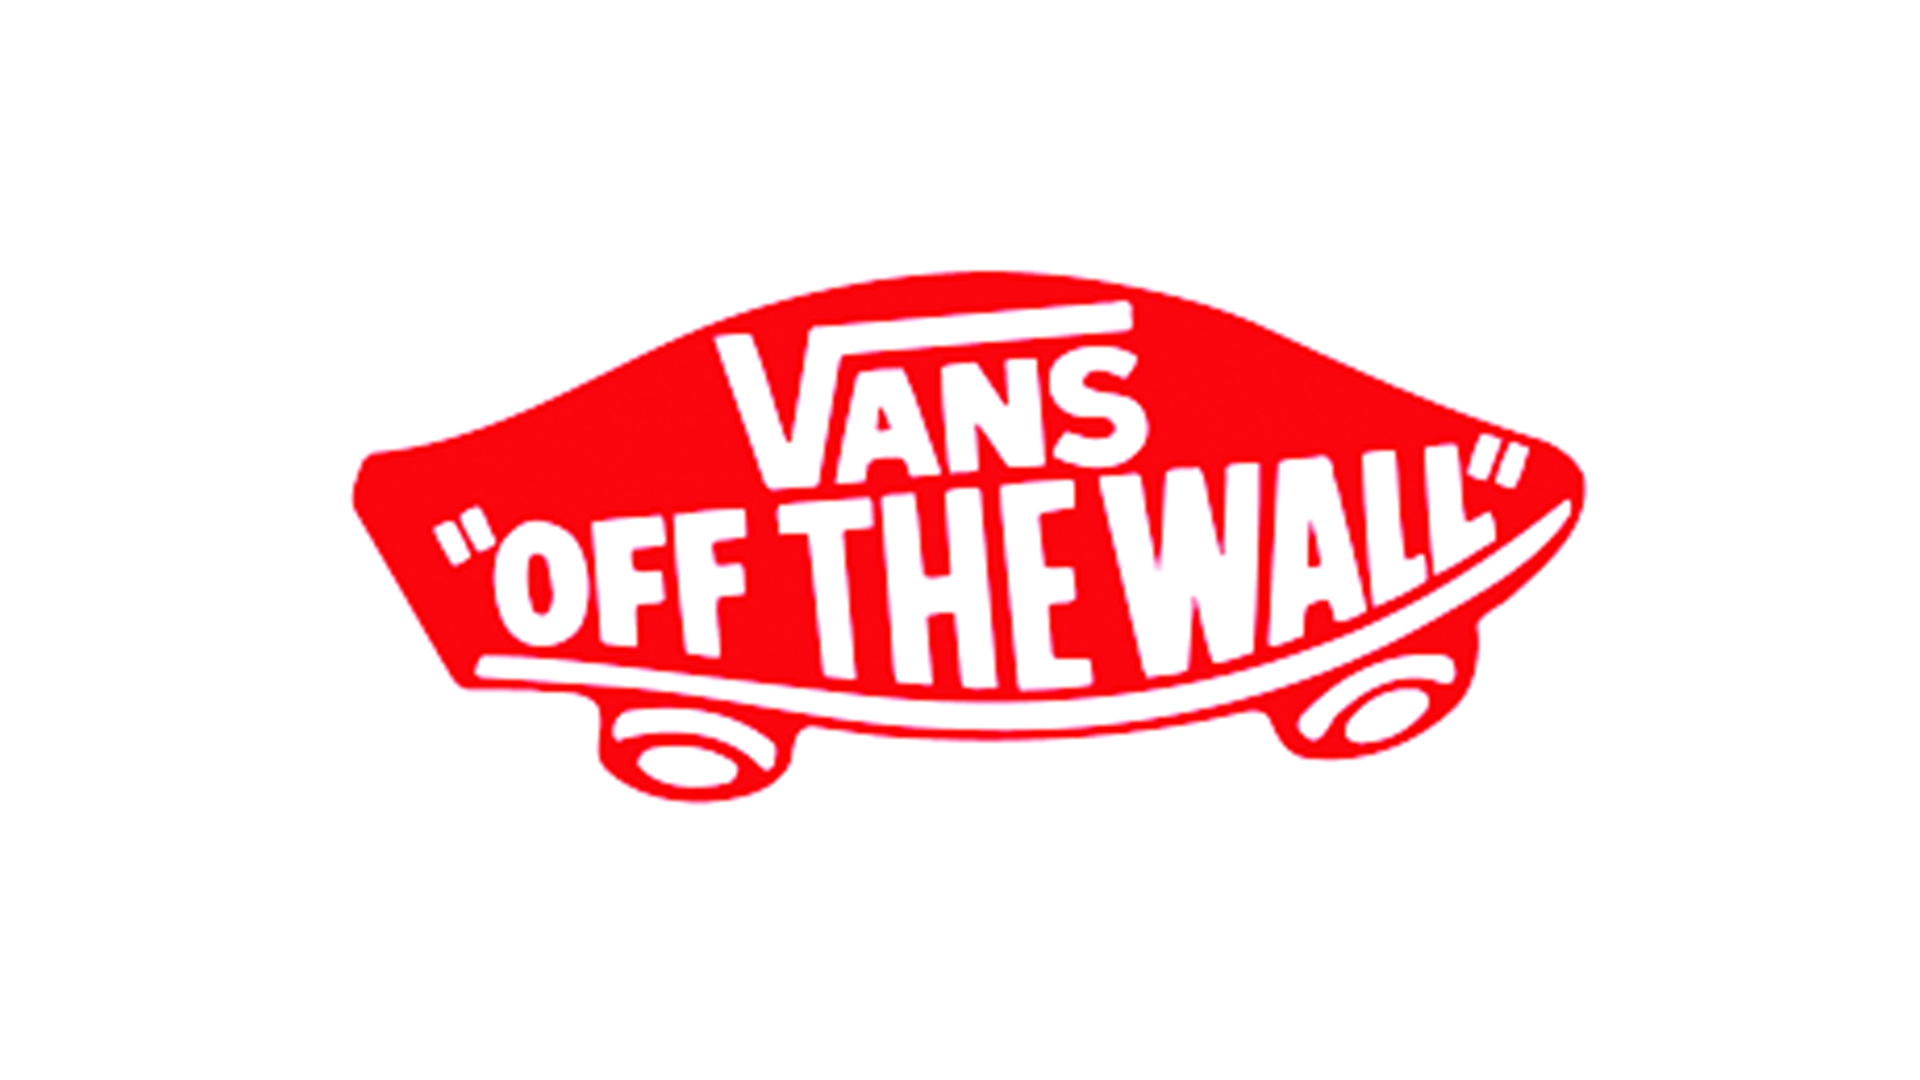 Vans 'Off The Wall'